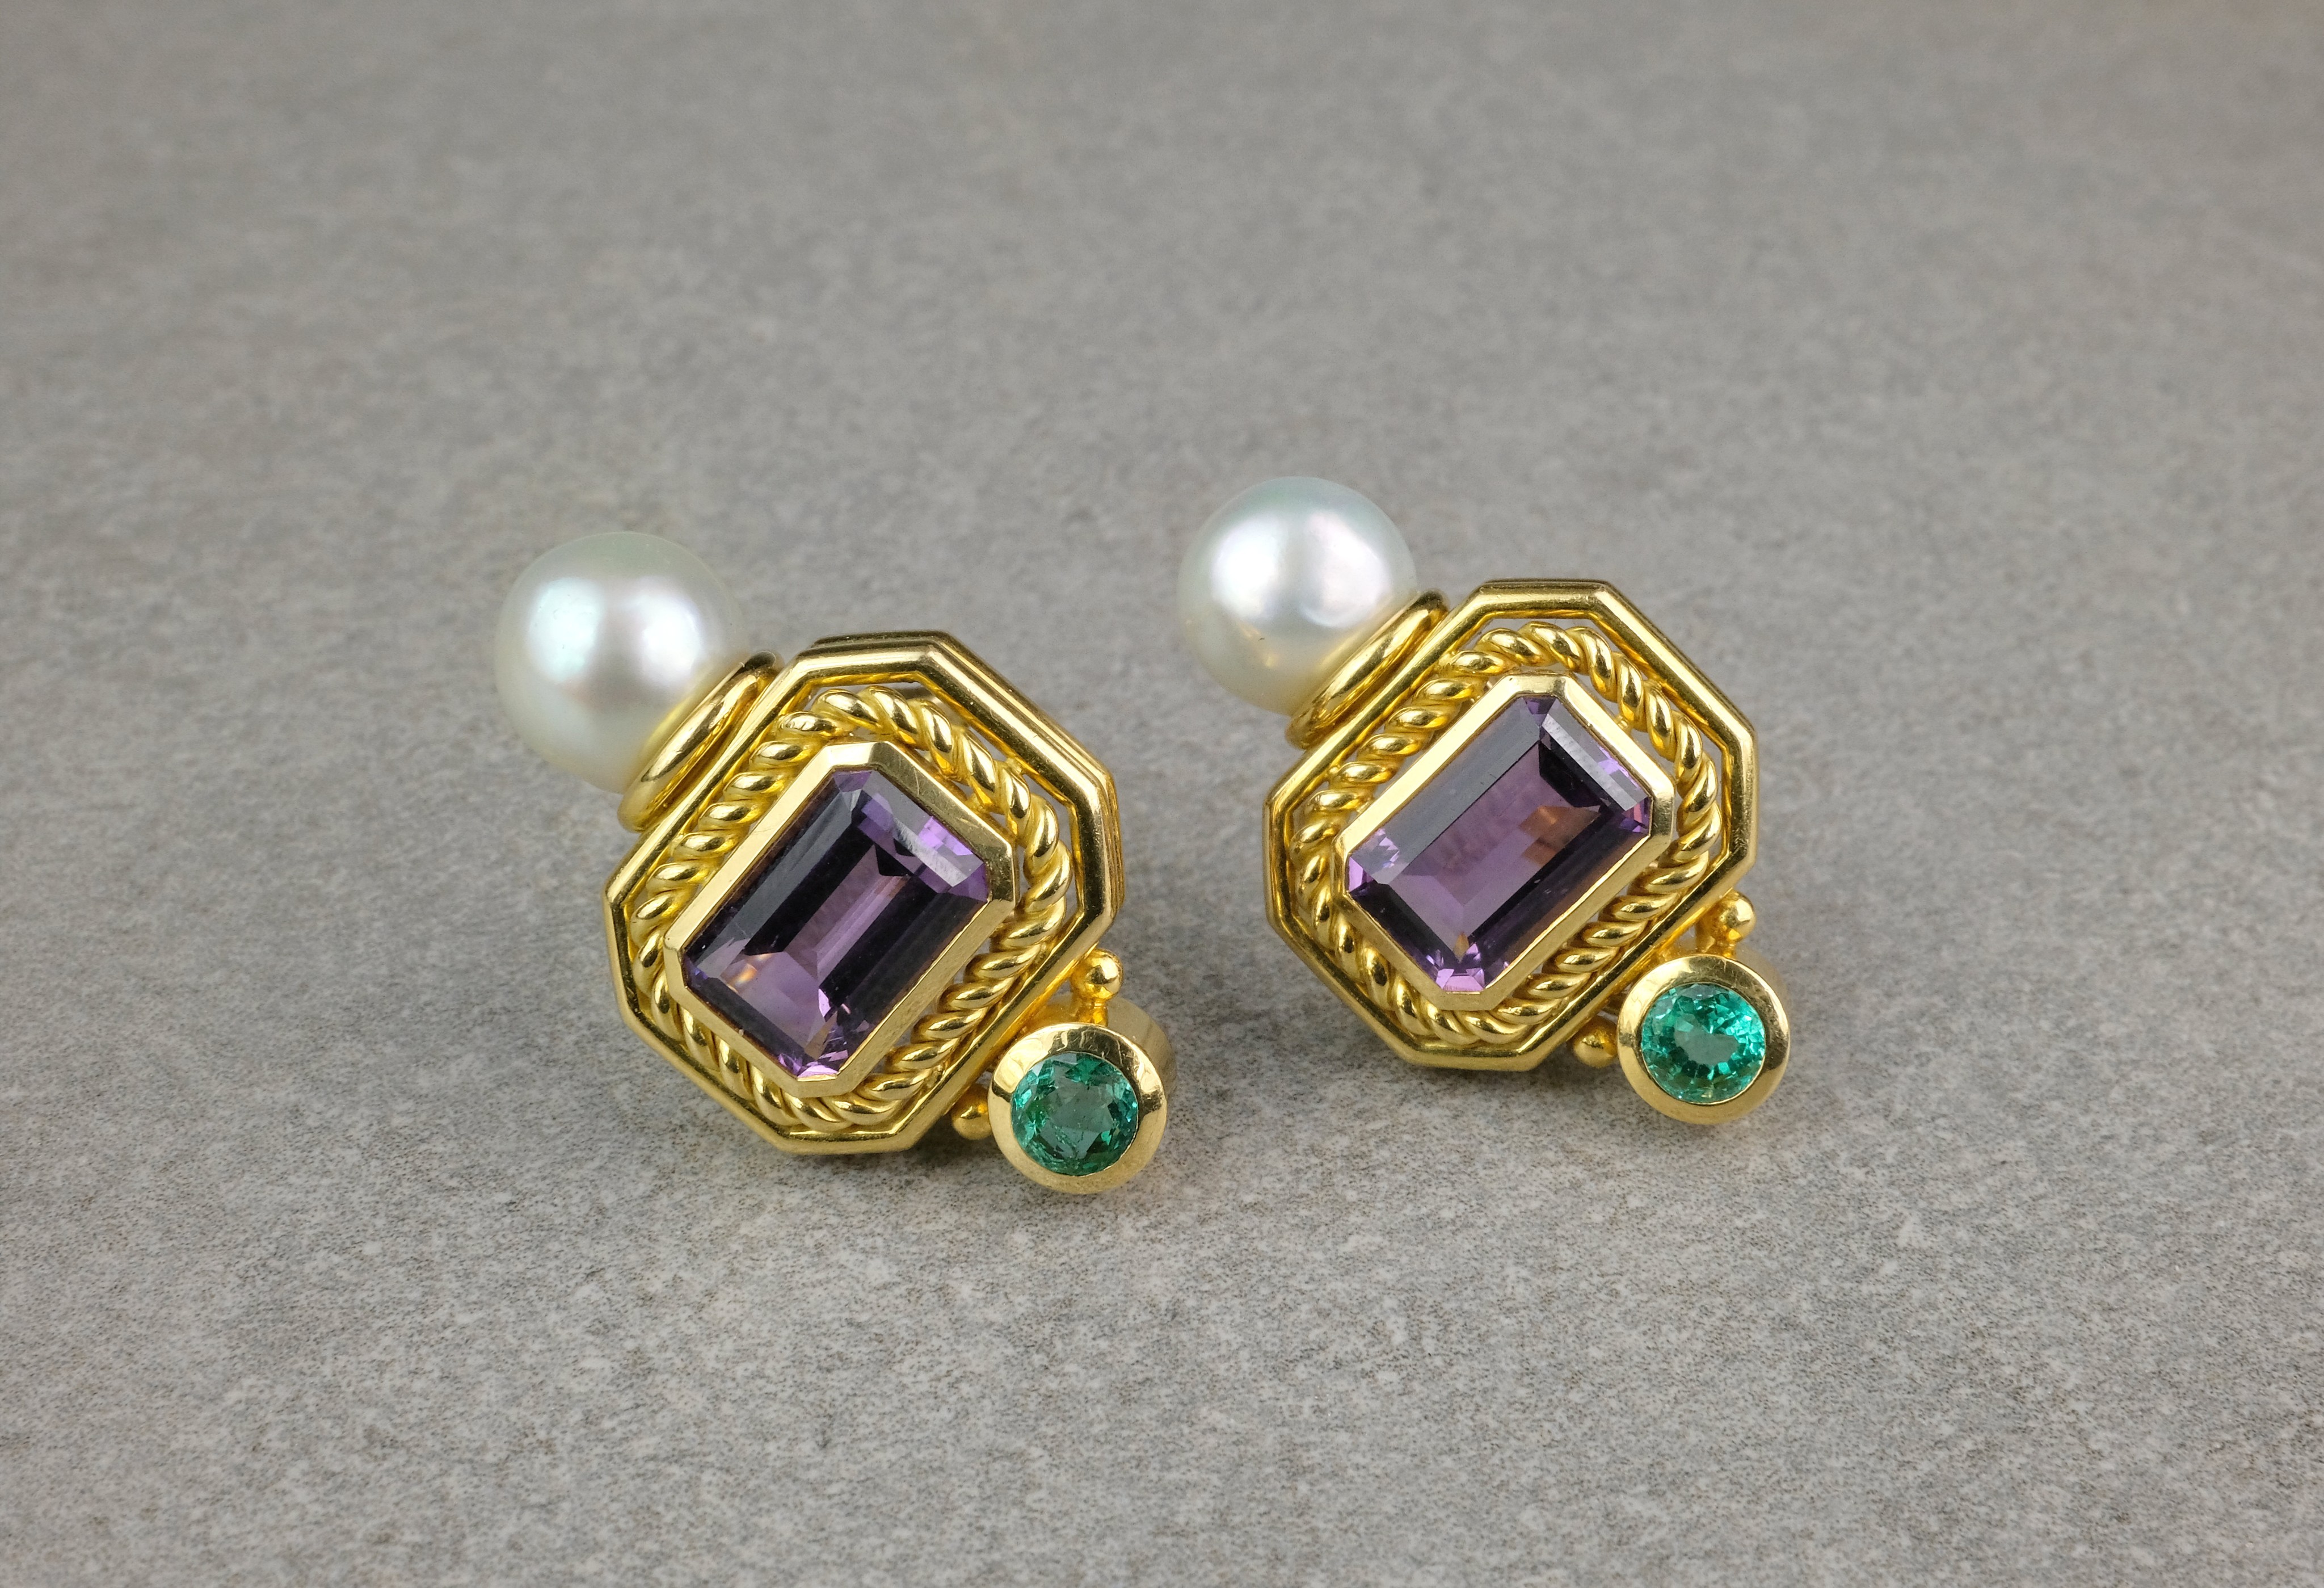 A pair of 18ct gold, amethyst, pearl and tourmaline ear clips by Leo de Vroomen, each with an